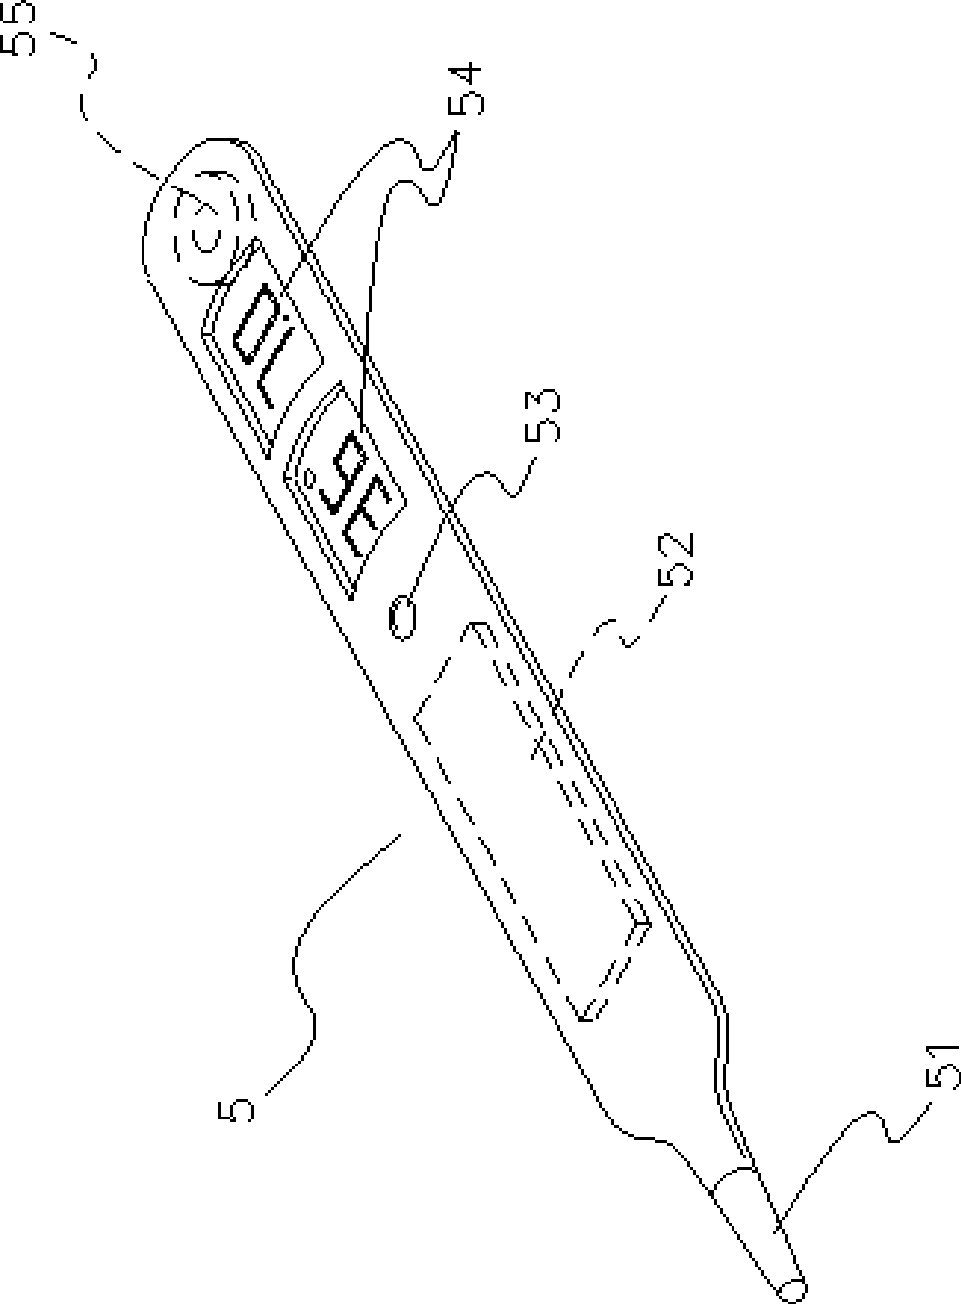 Non-invasive method and apparatus for detecting human body acid-base index by body fluid